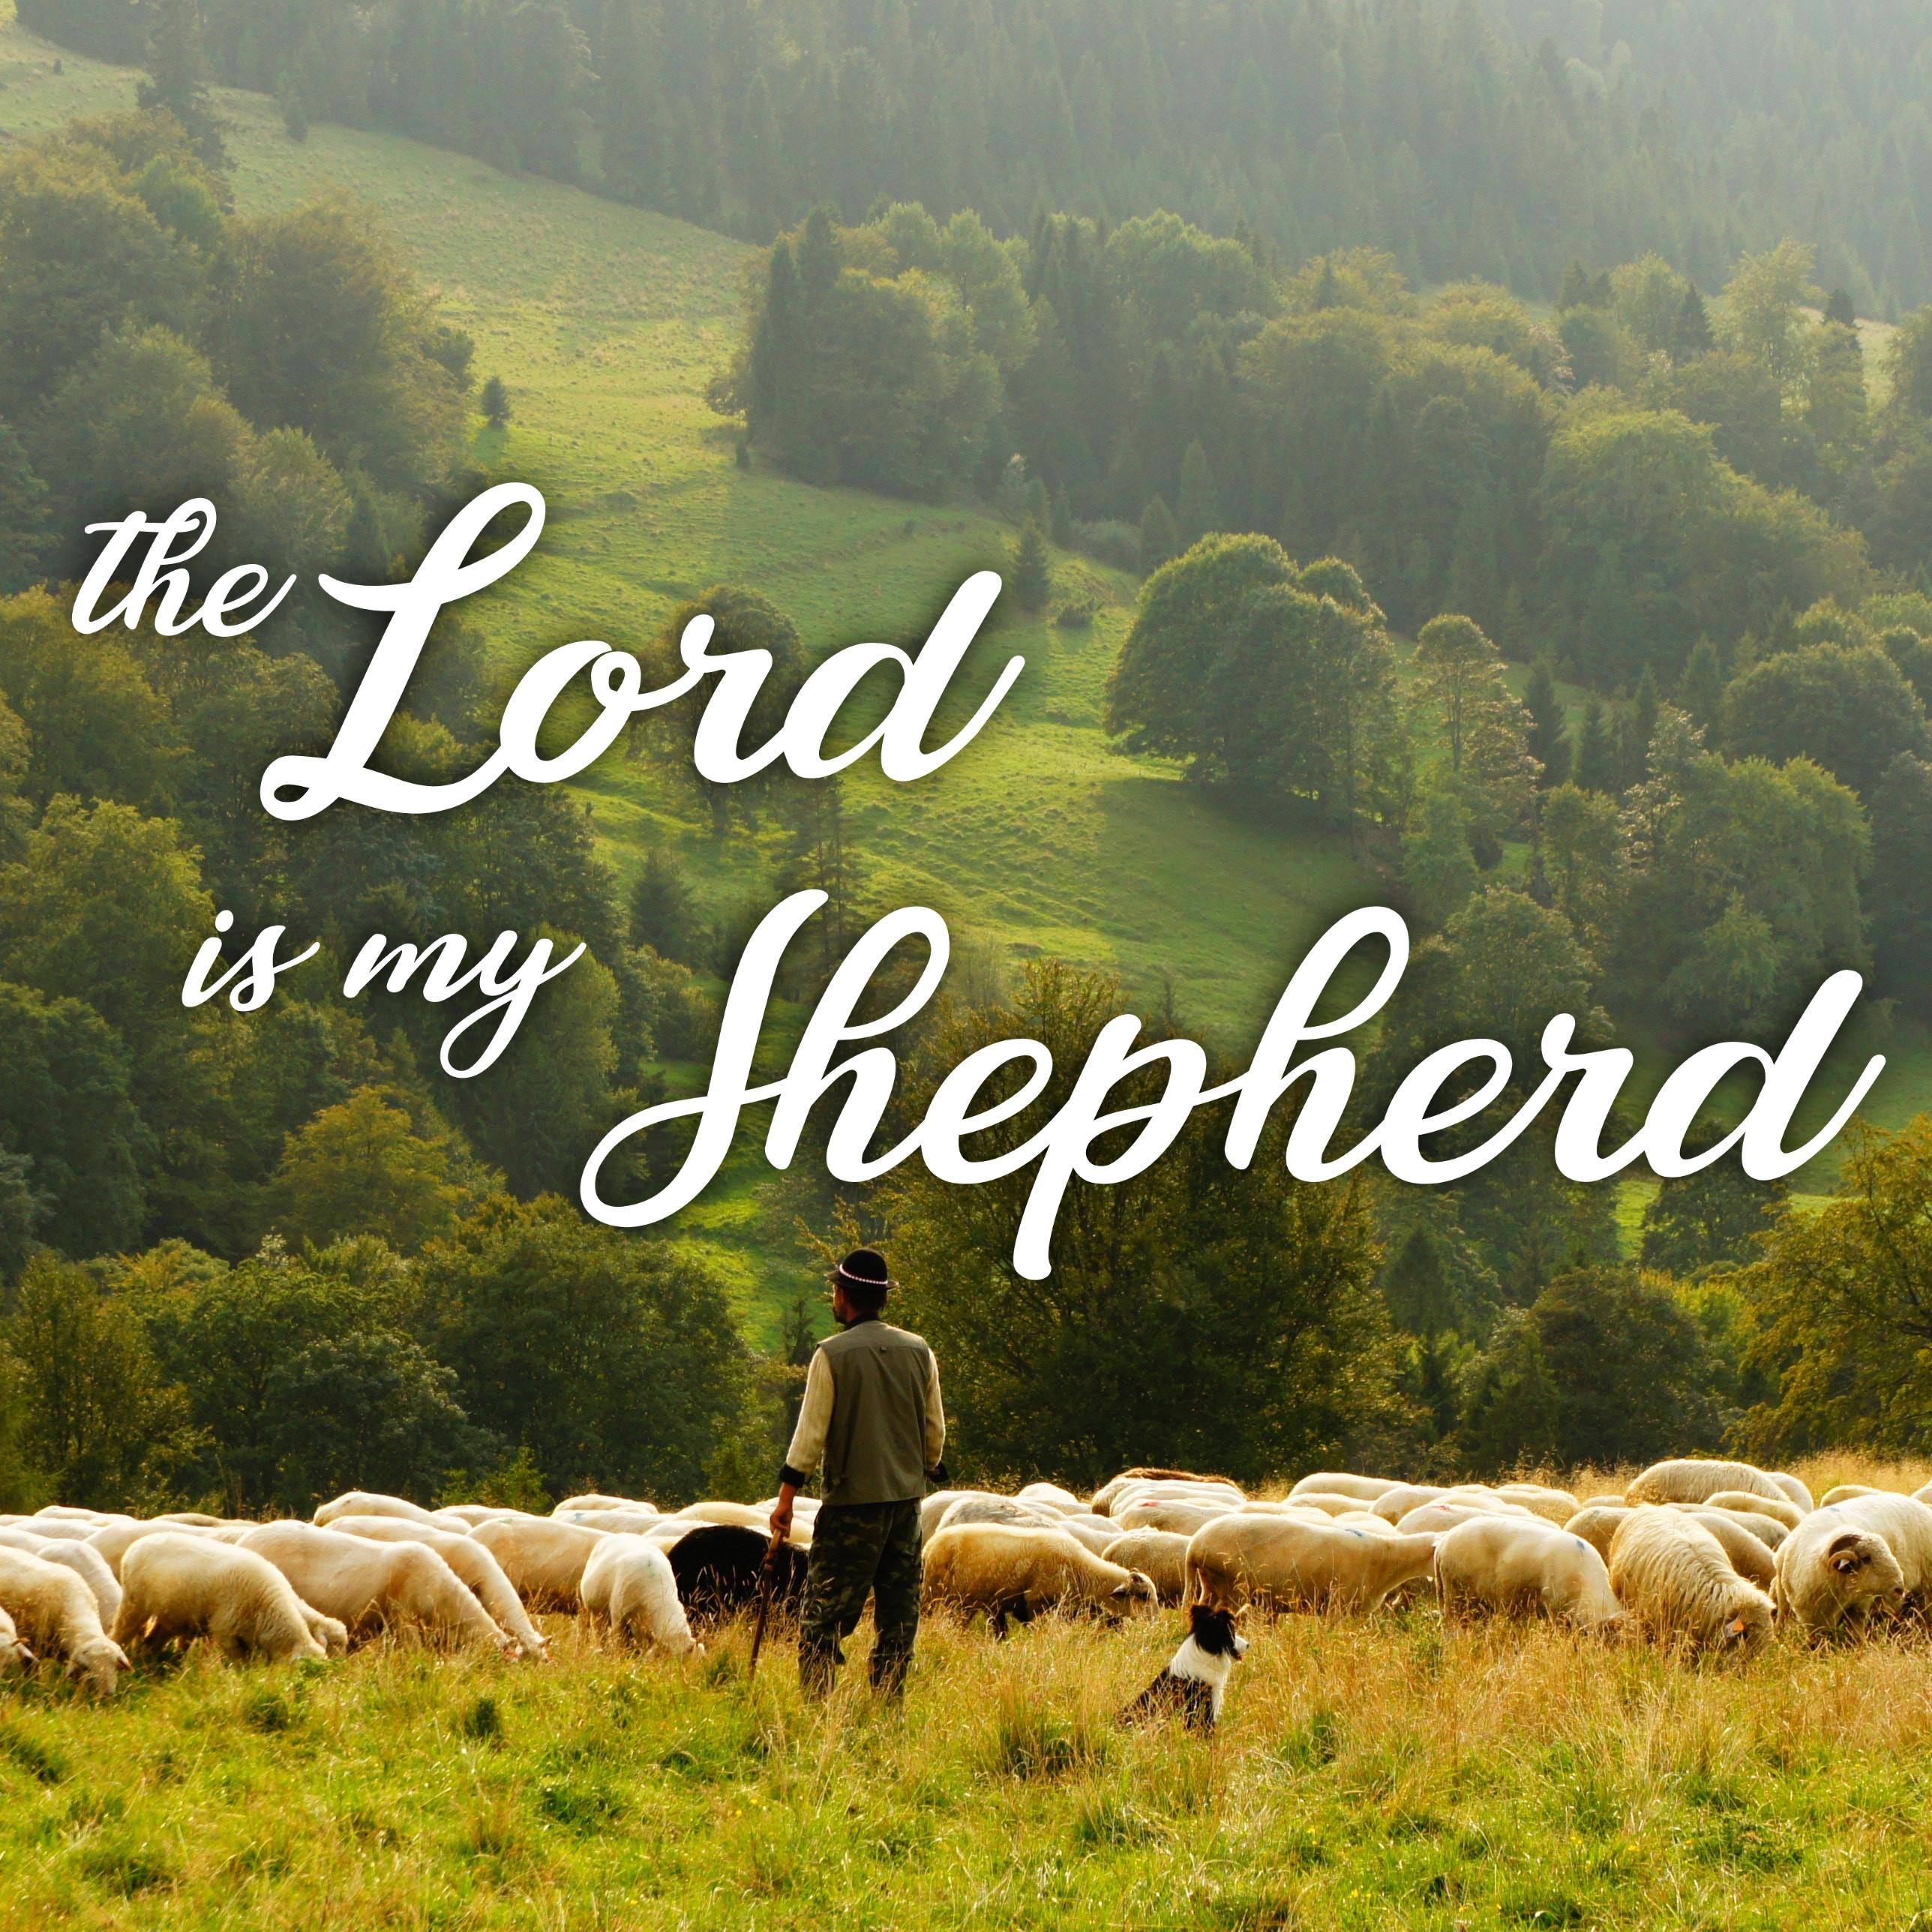 The Lord Is My Shepherd Wallpapers - Wallpaper Cave